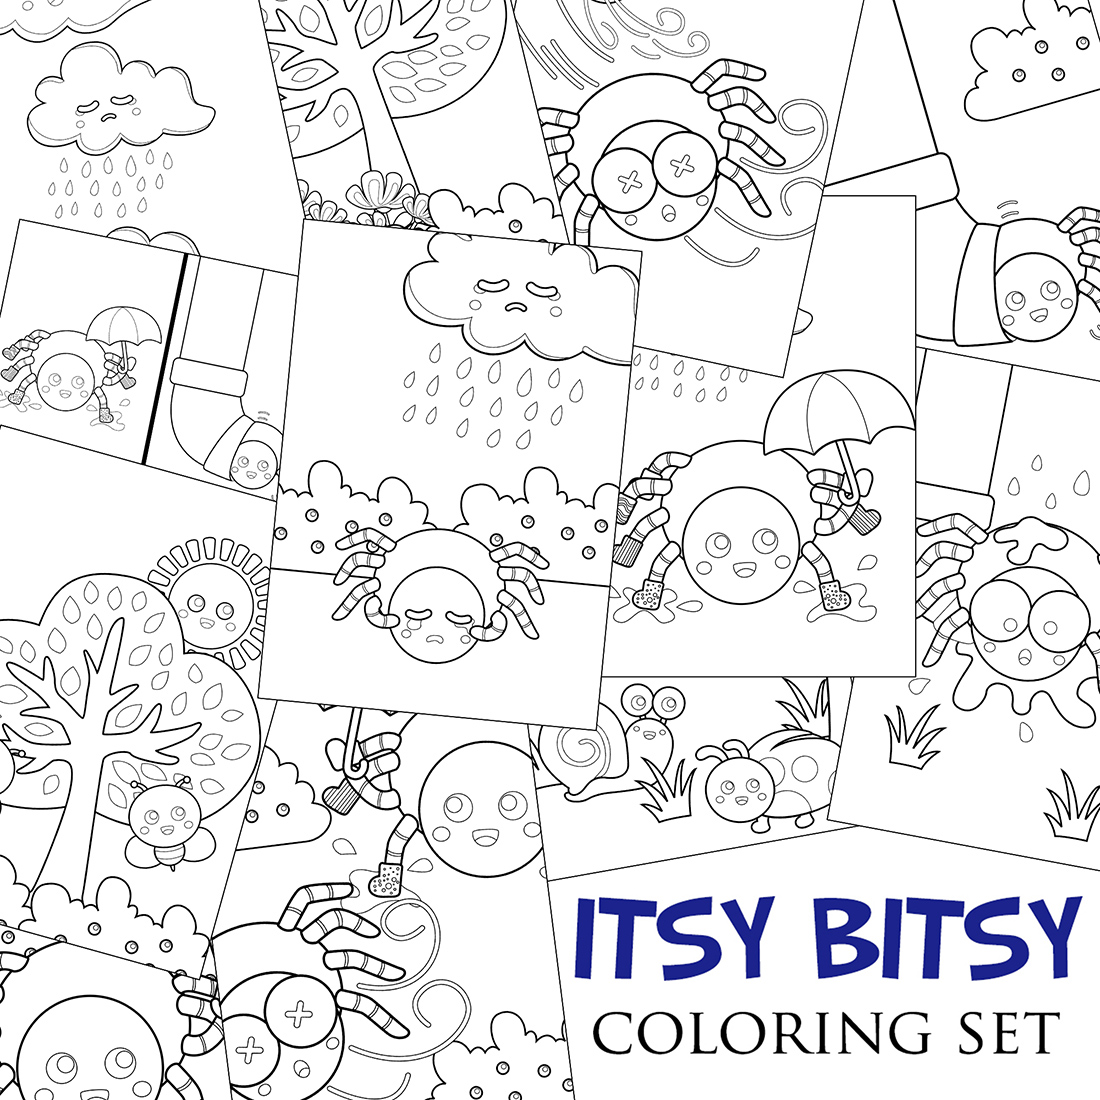 Itsy Bitsy Spider Kids Bedtime Story Classic Rhymes Coloring Pages Activity For Kids And Adult cover image.